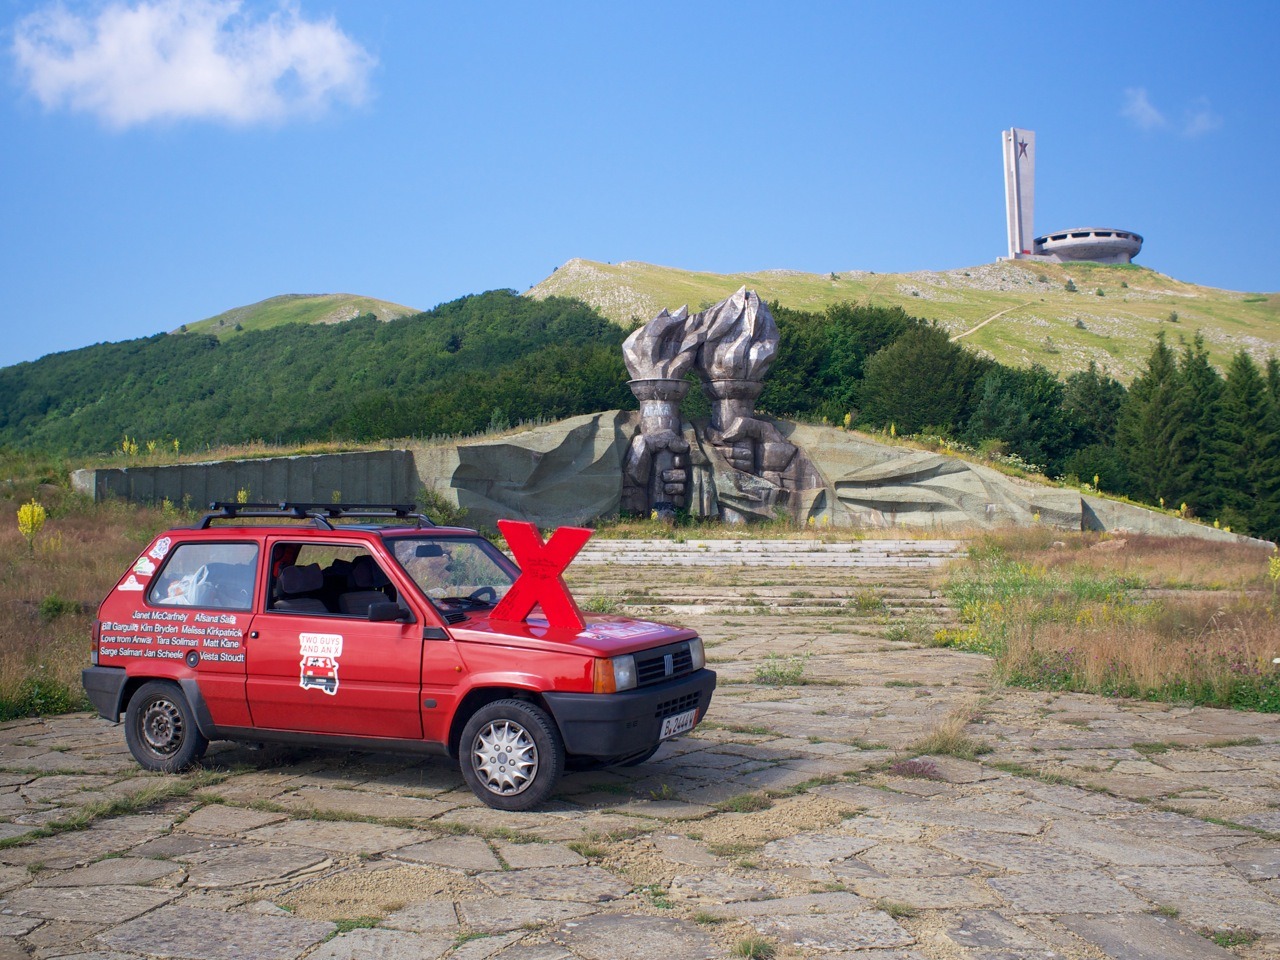 Nate Mook and Steve Garguilo visit Buzludzha, an abandoned communist monument in Bulgaria. With a big red x. Photo: Nate Mook